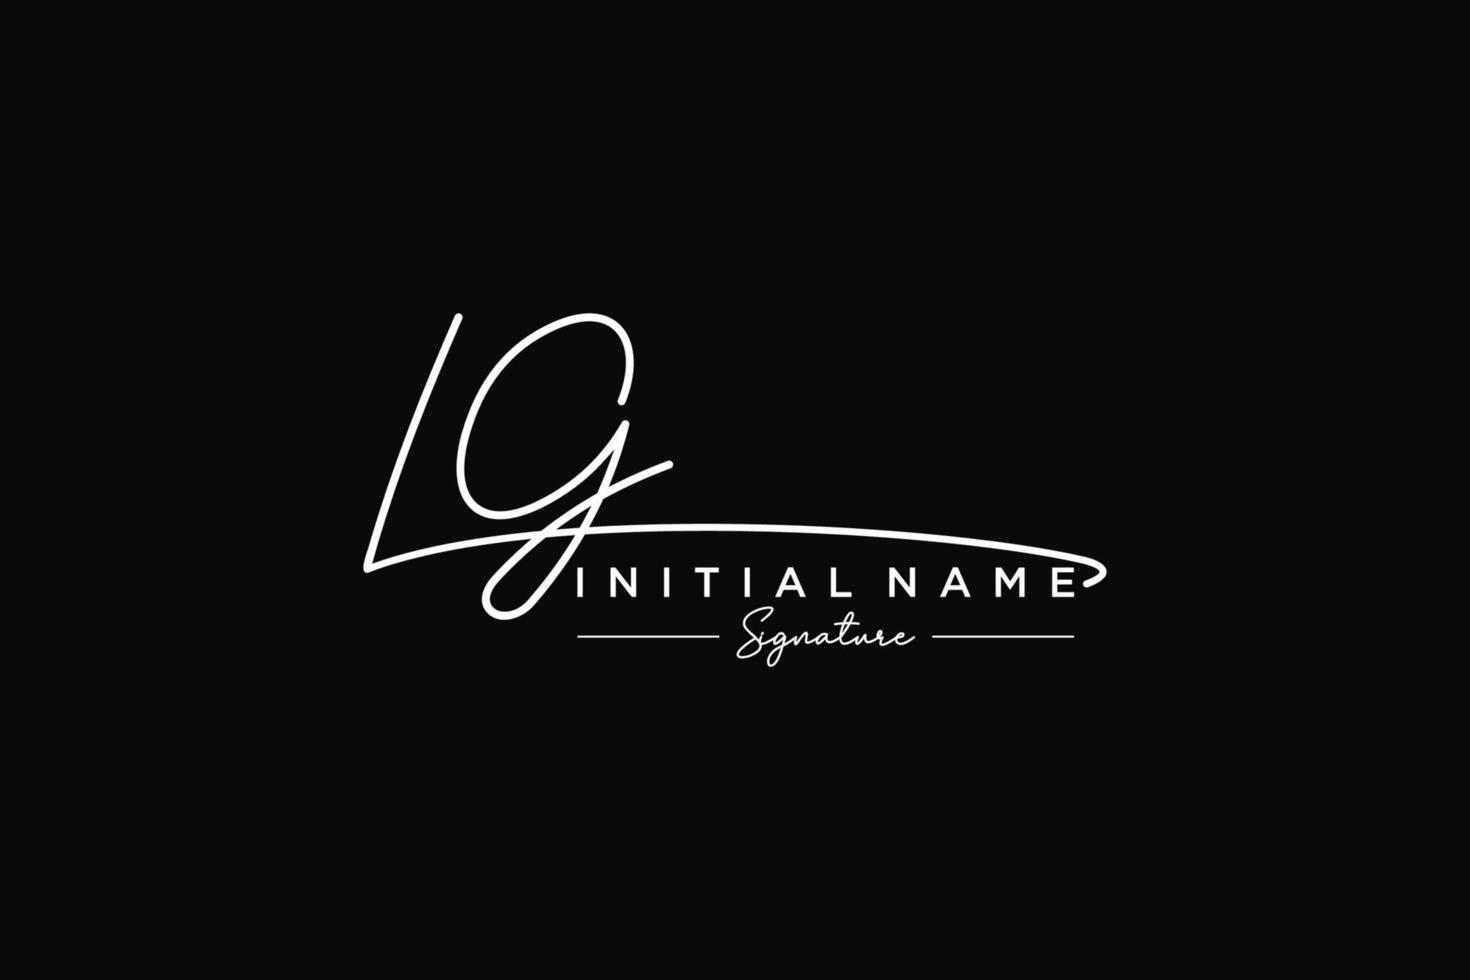 Initial LG signature logo template vector. Hand drawn Calligraphy lettering Vector illustration.